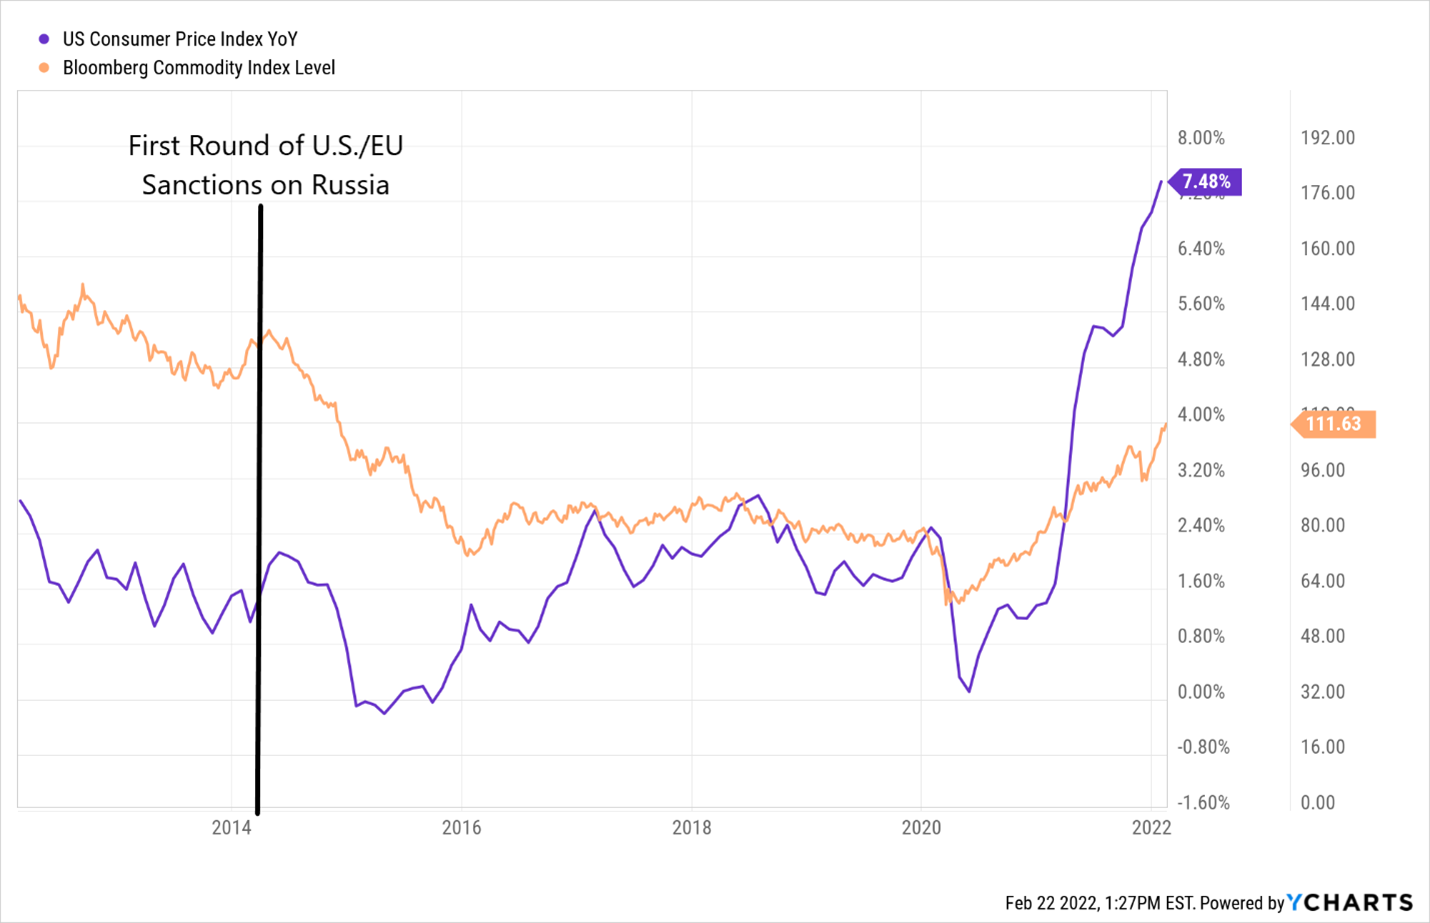 A chart showing a decrease in energy prices and inflation following previous sanctions on Russia in 2014